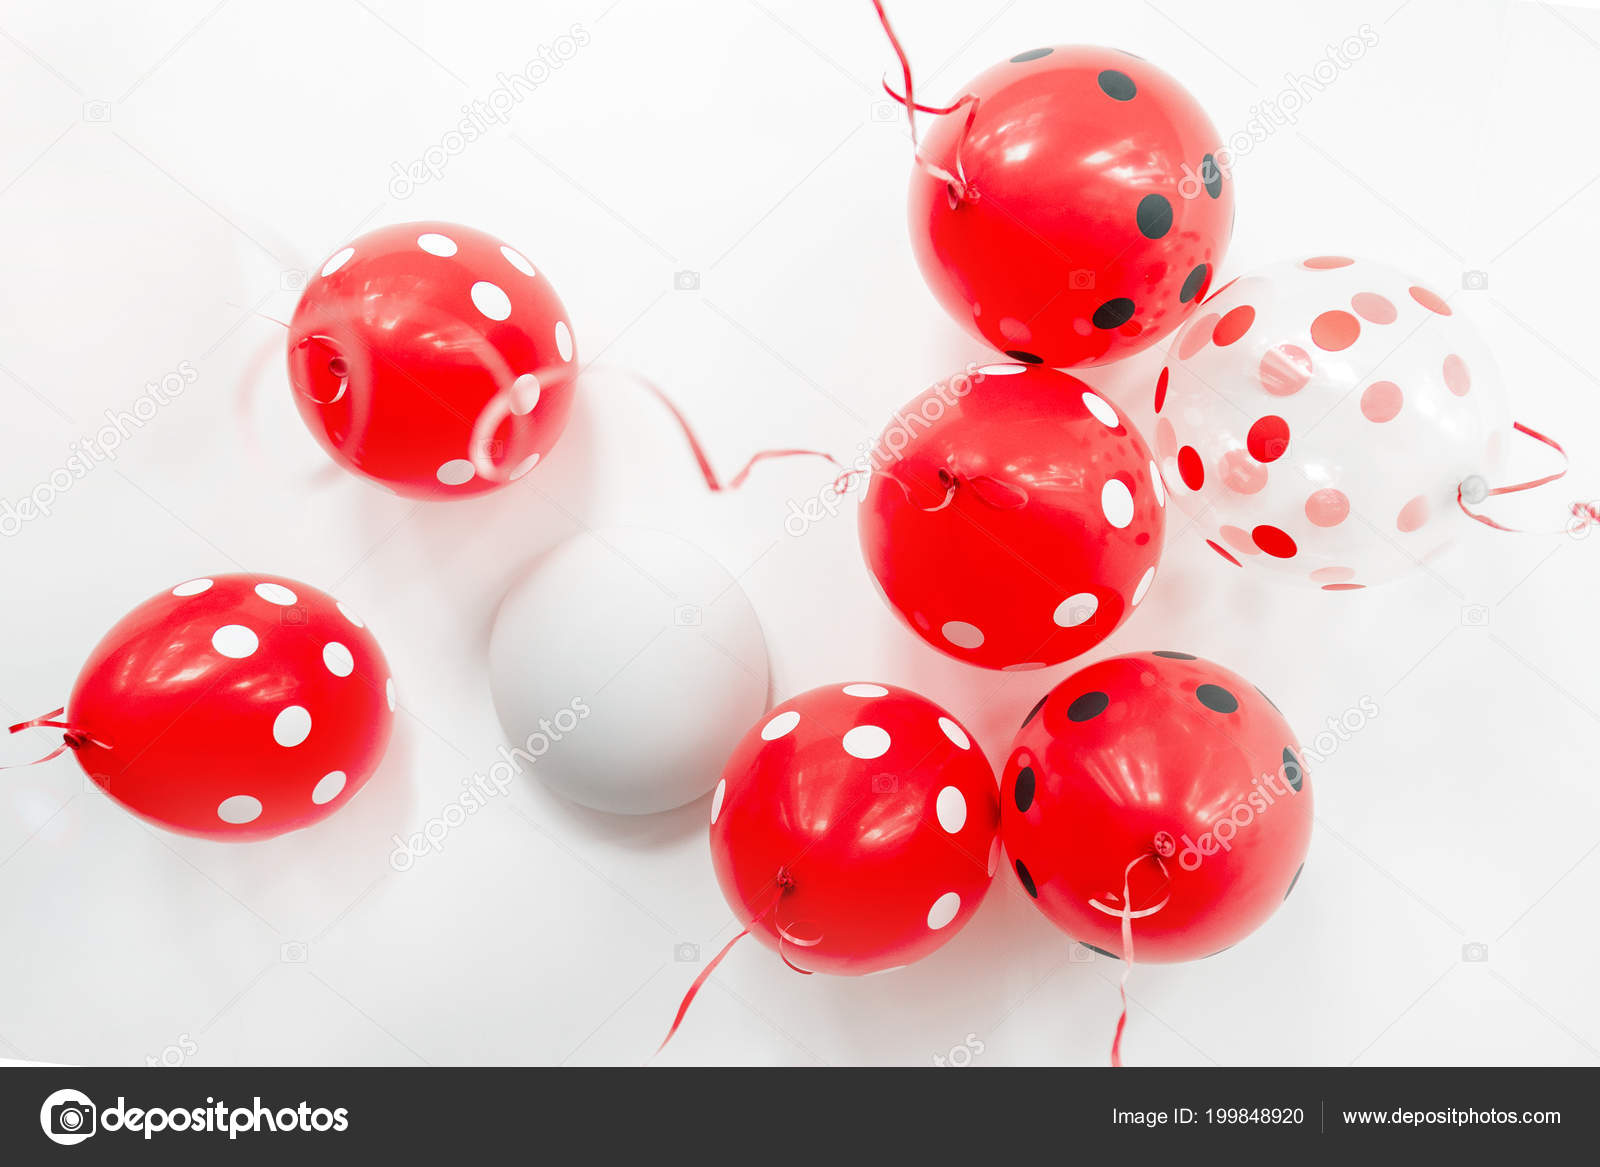 Beautiful Red Dotted Balloons Floating White Ceiling Wedding